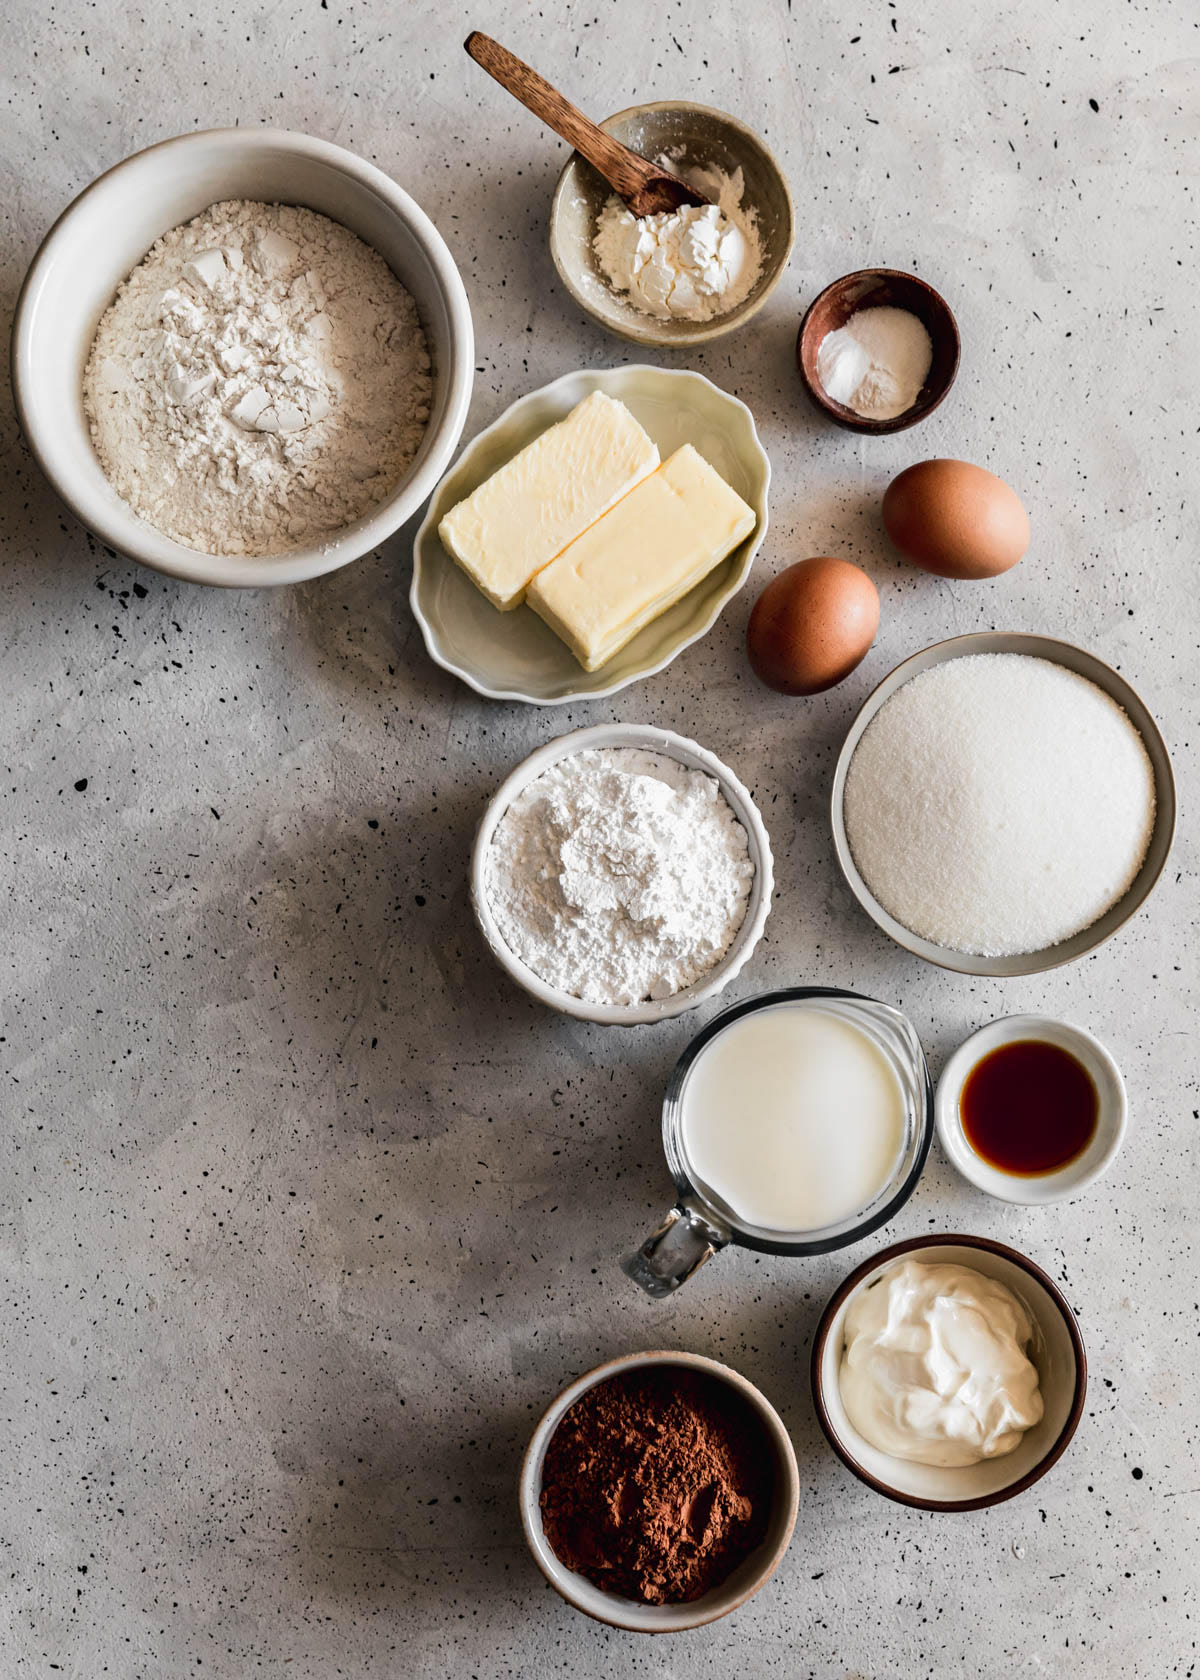 A variety of white and grey bowls filled with baking ingredients like flour, butter, sugar, eggs, cocoa powder, sour cream, and milk on a grey speckled counter.